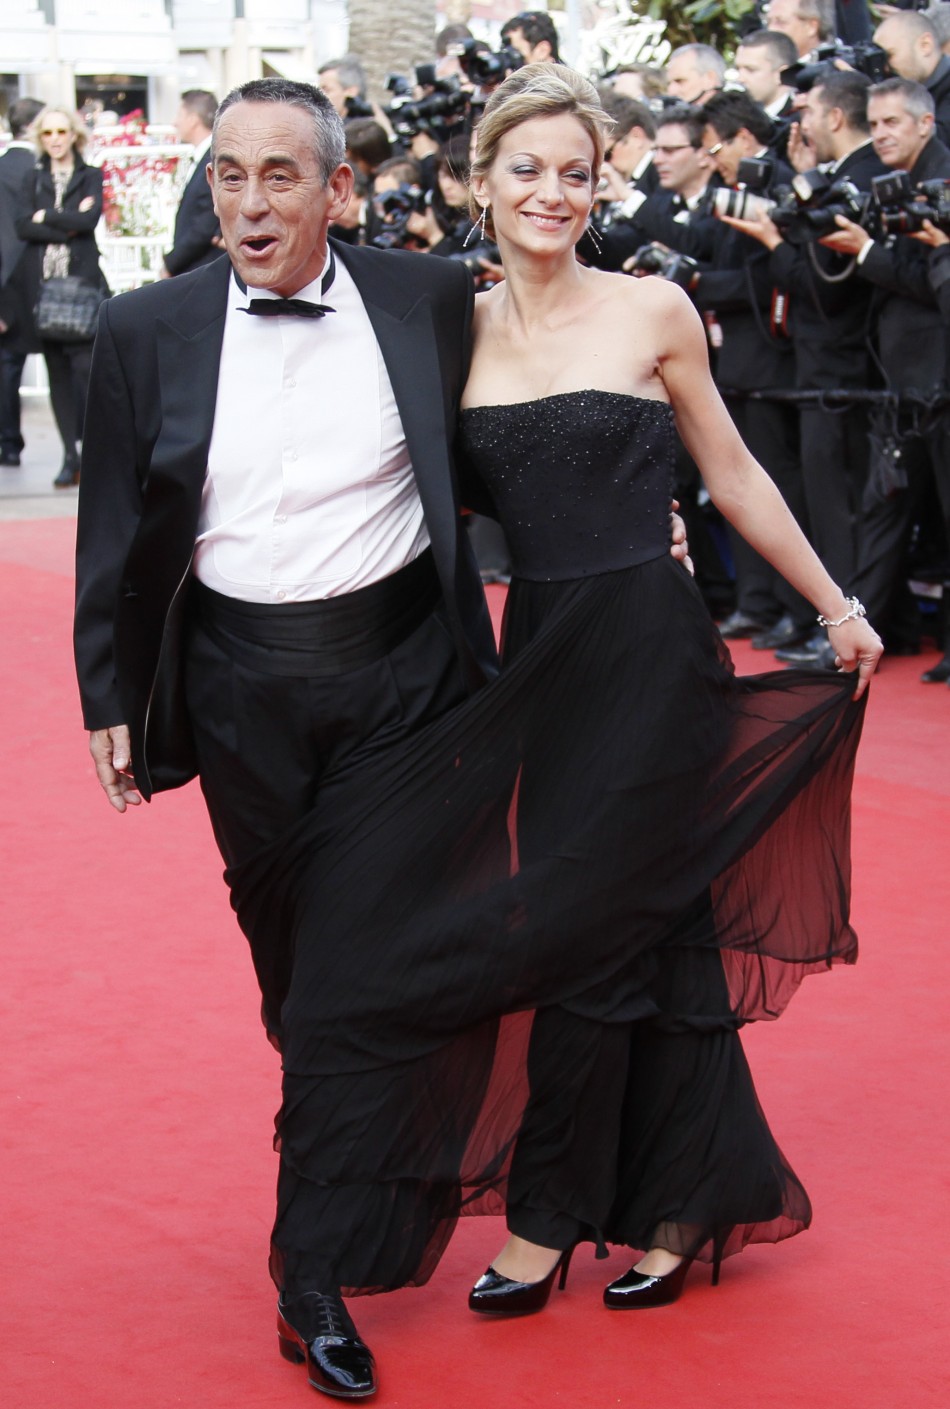 TV host Ardisson and his girlfriend Crespo-Mara arrive on the red carpet for the screening of the film Lawless in competition at the 65th Cannes Film Festival